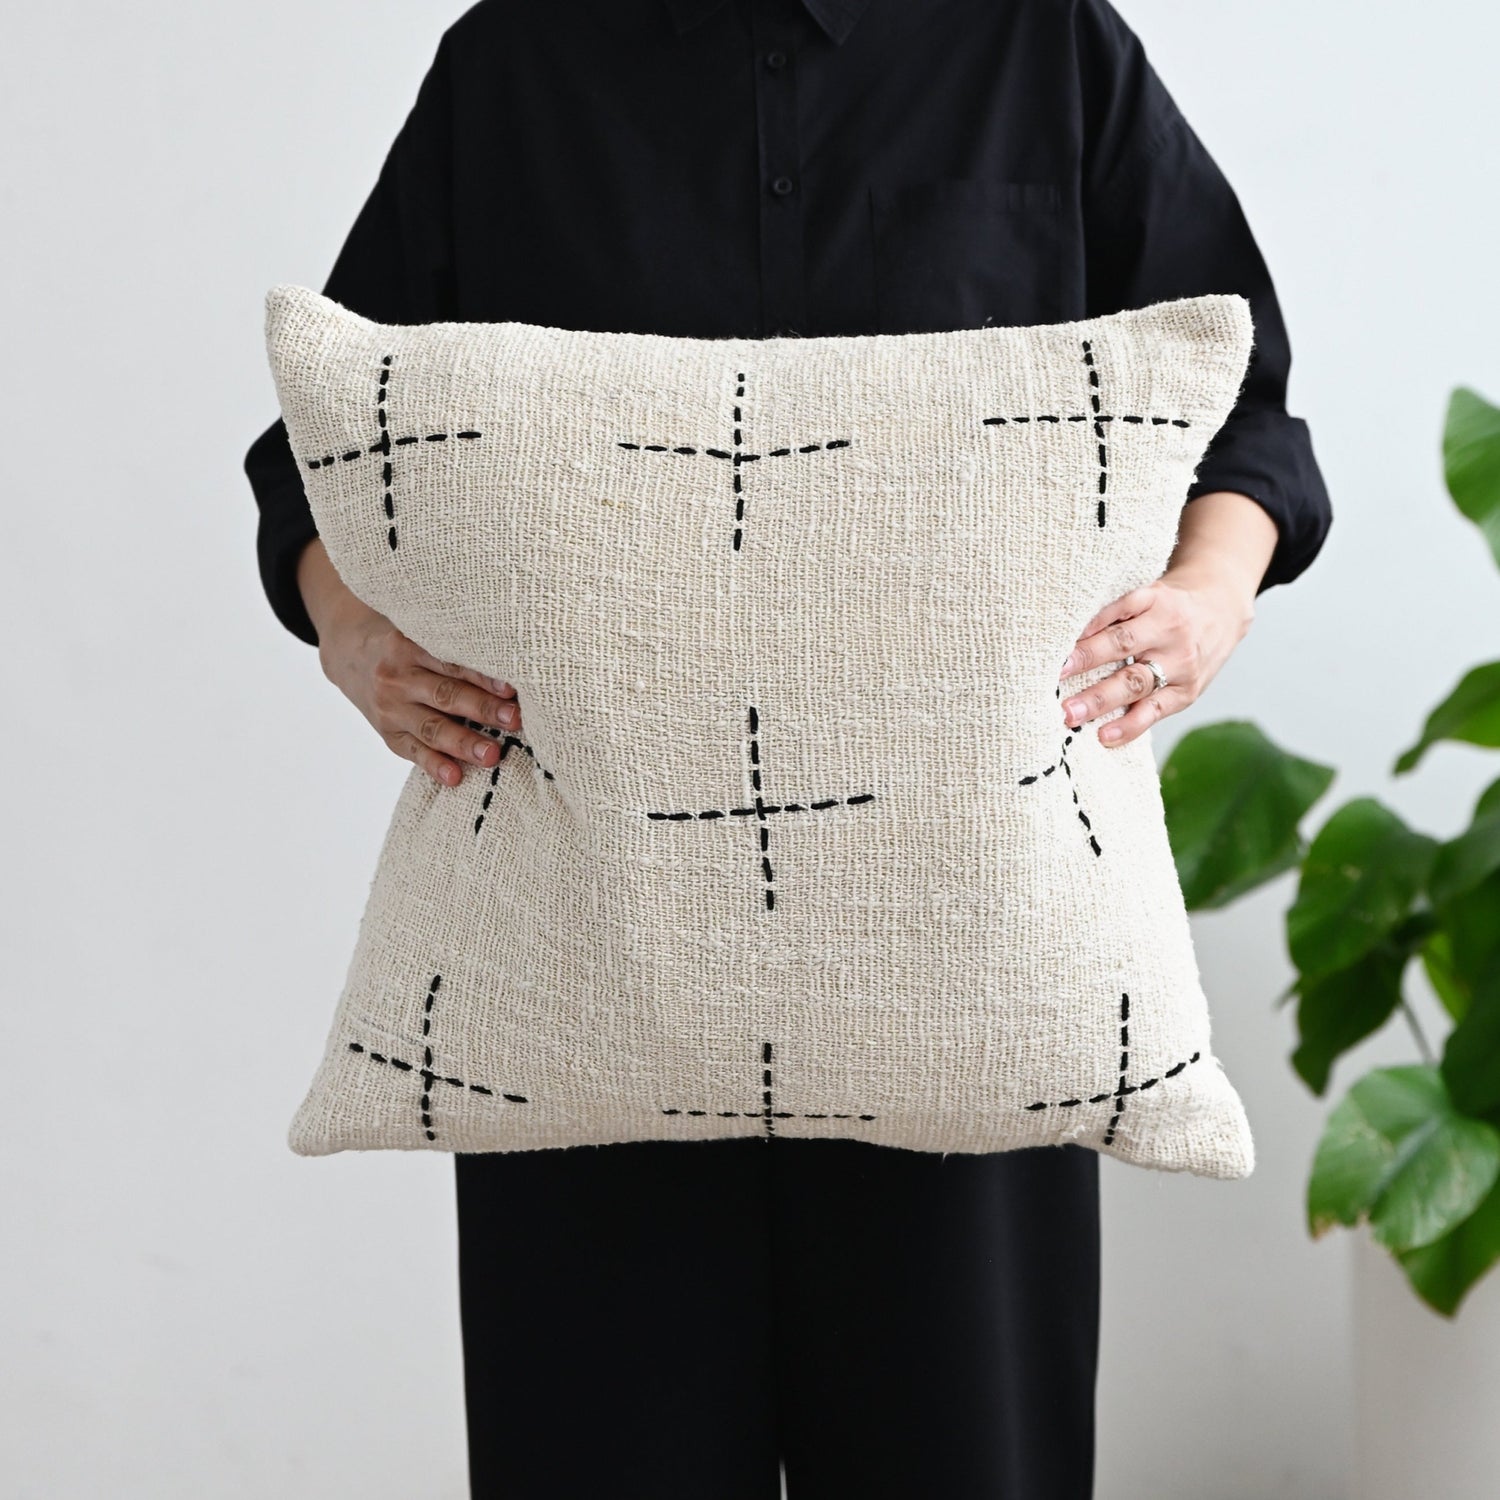 Lalabella Cushion with Stiched Cross